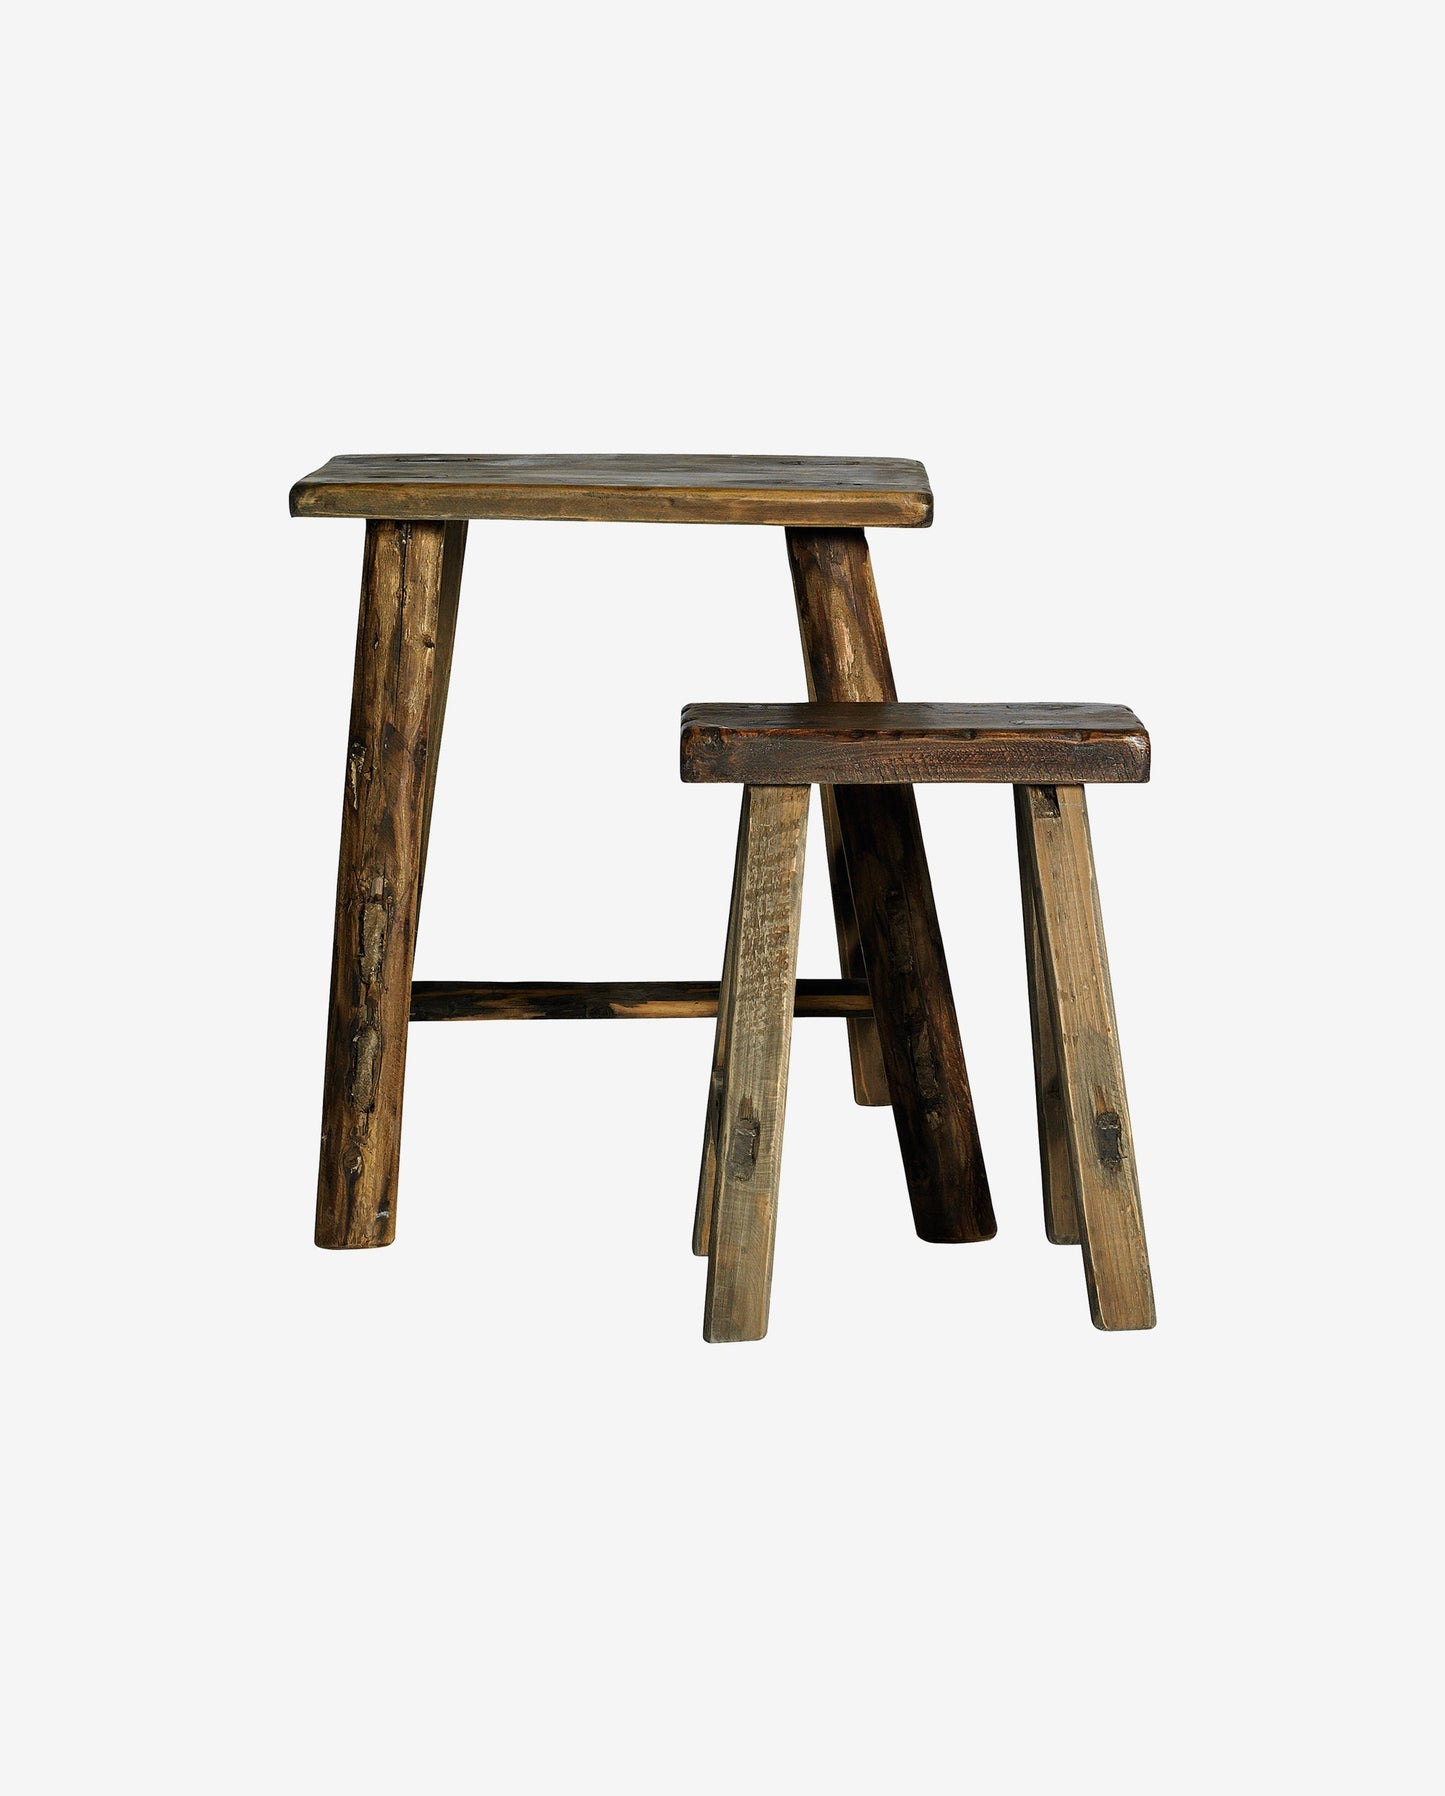 Nordal ROUGH stool, s/2, wooden